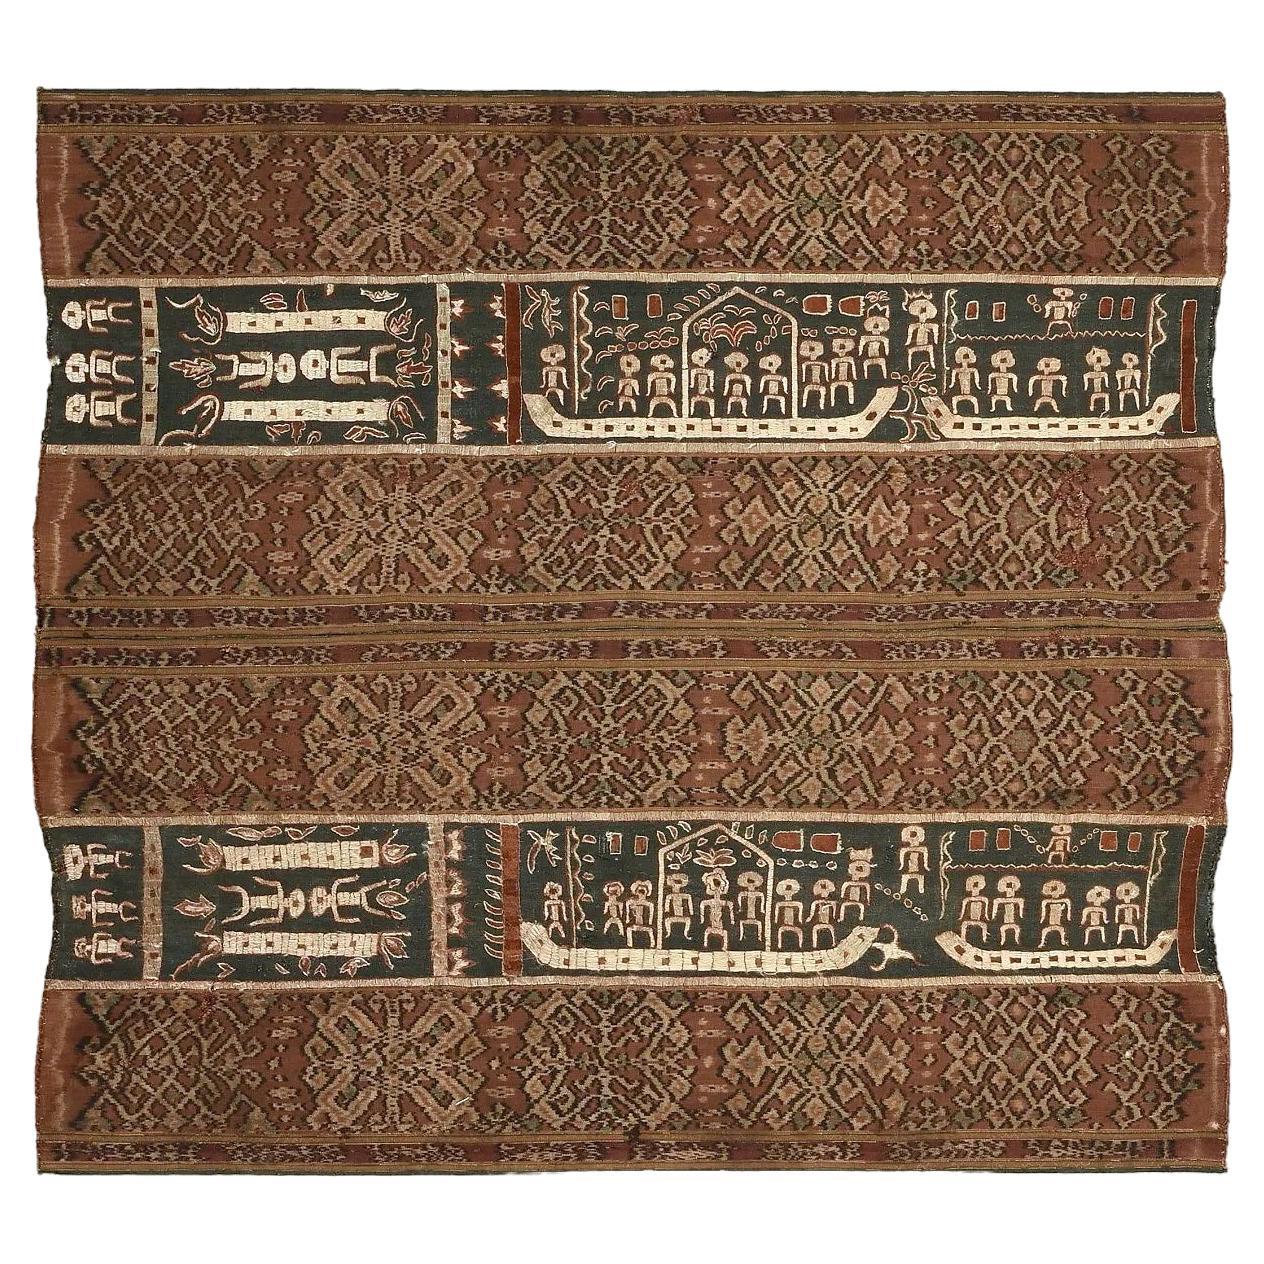 Ikat and Embroidery Textile Panel from Sumatra Indonesia For Sale